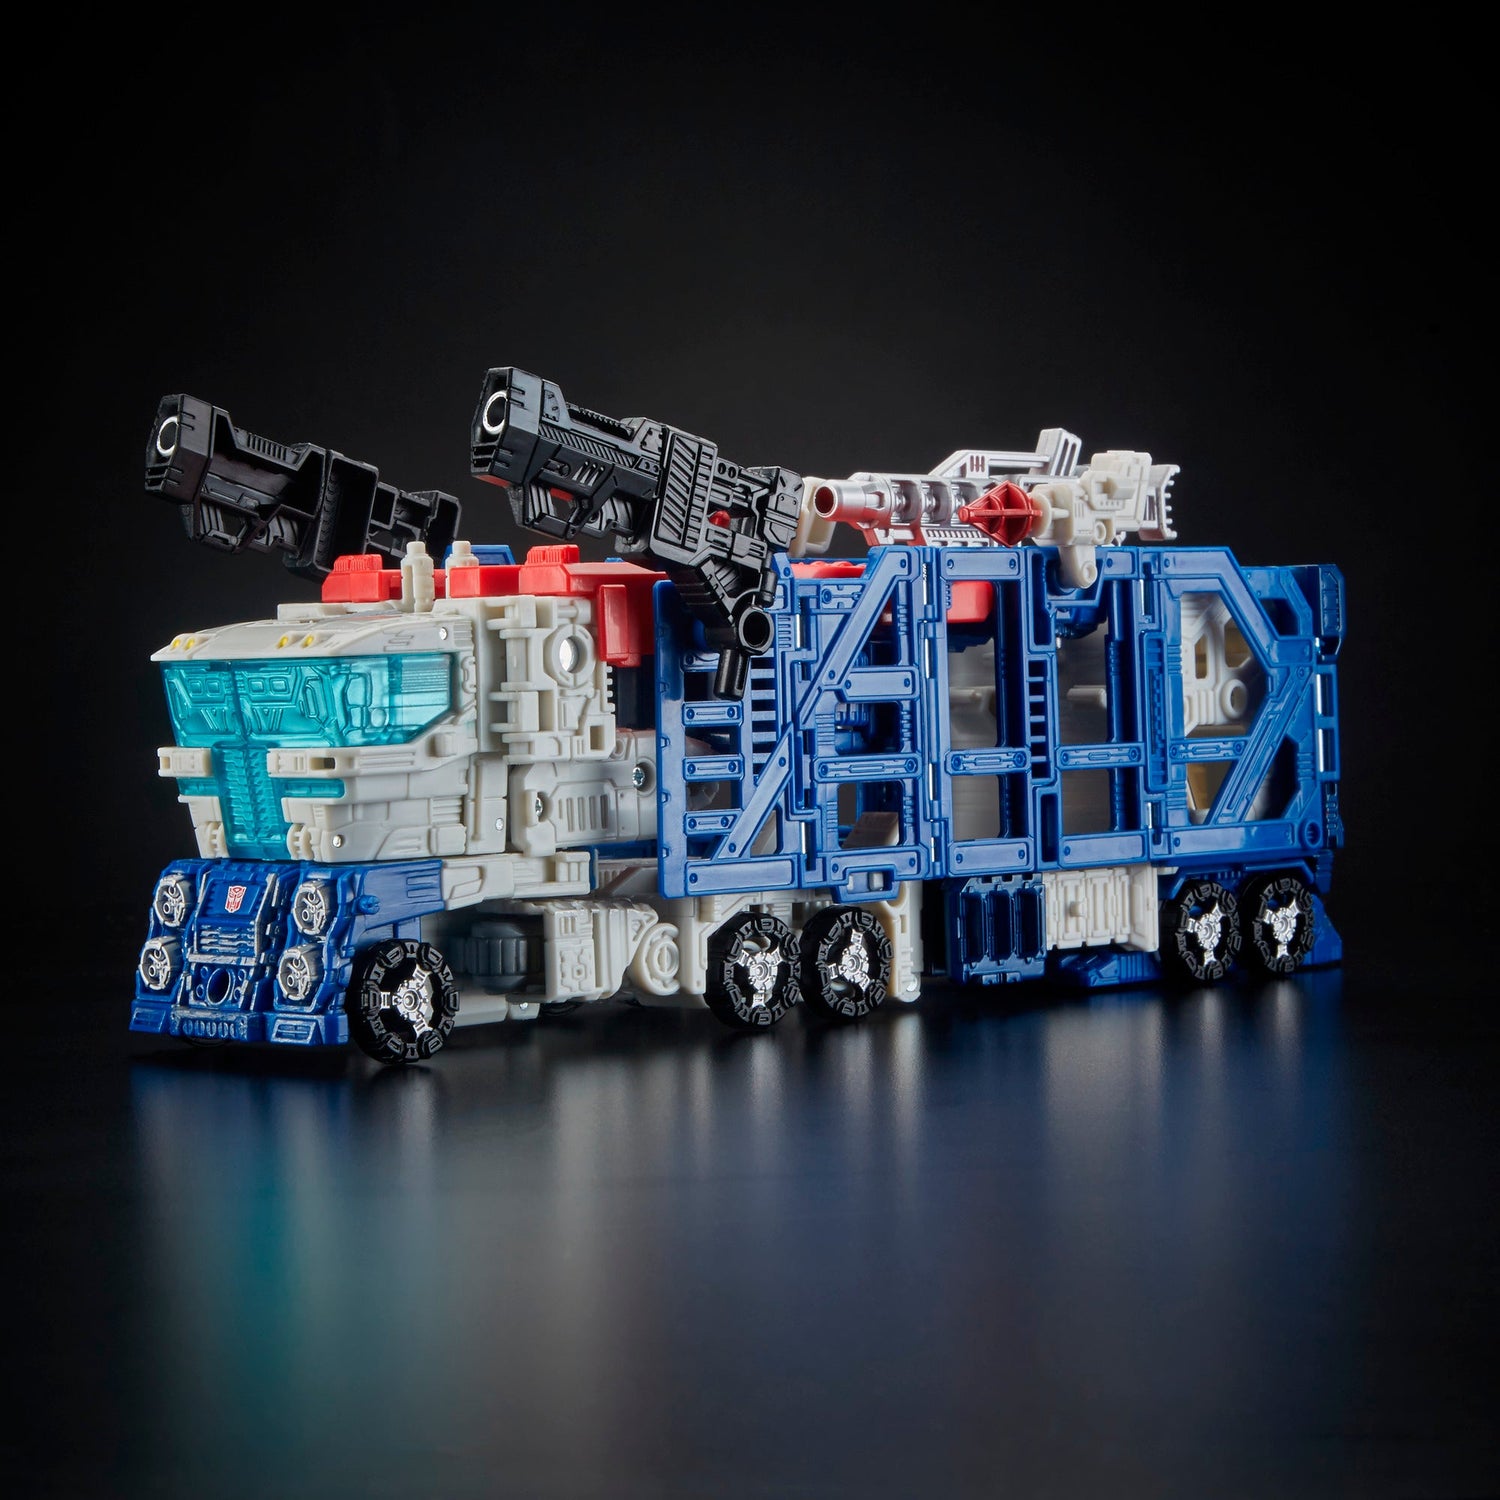 Transformers Generations War for Cybertron: Siege Leader Class WFC-S13 Ultra Magnus Action Figure